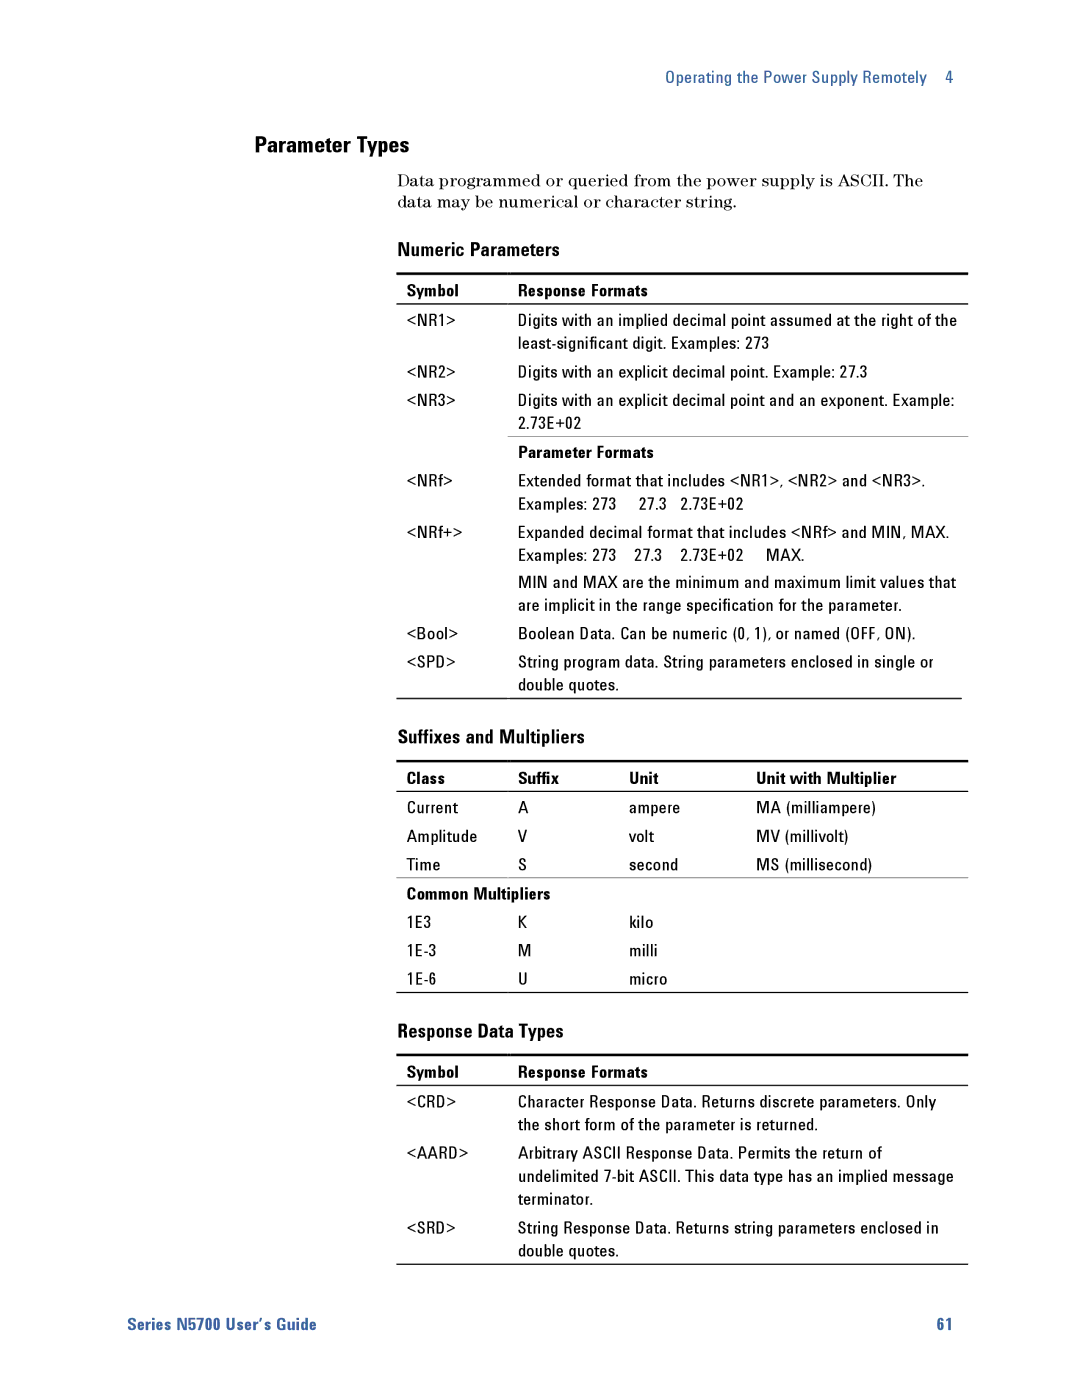 Agilent Technologies 5744A, 5752A, 5743A Parameter Types, Numeric Parameters, Suffixes and Multipliers, Response Data Types 